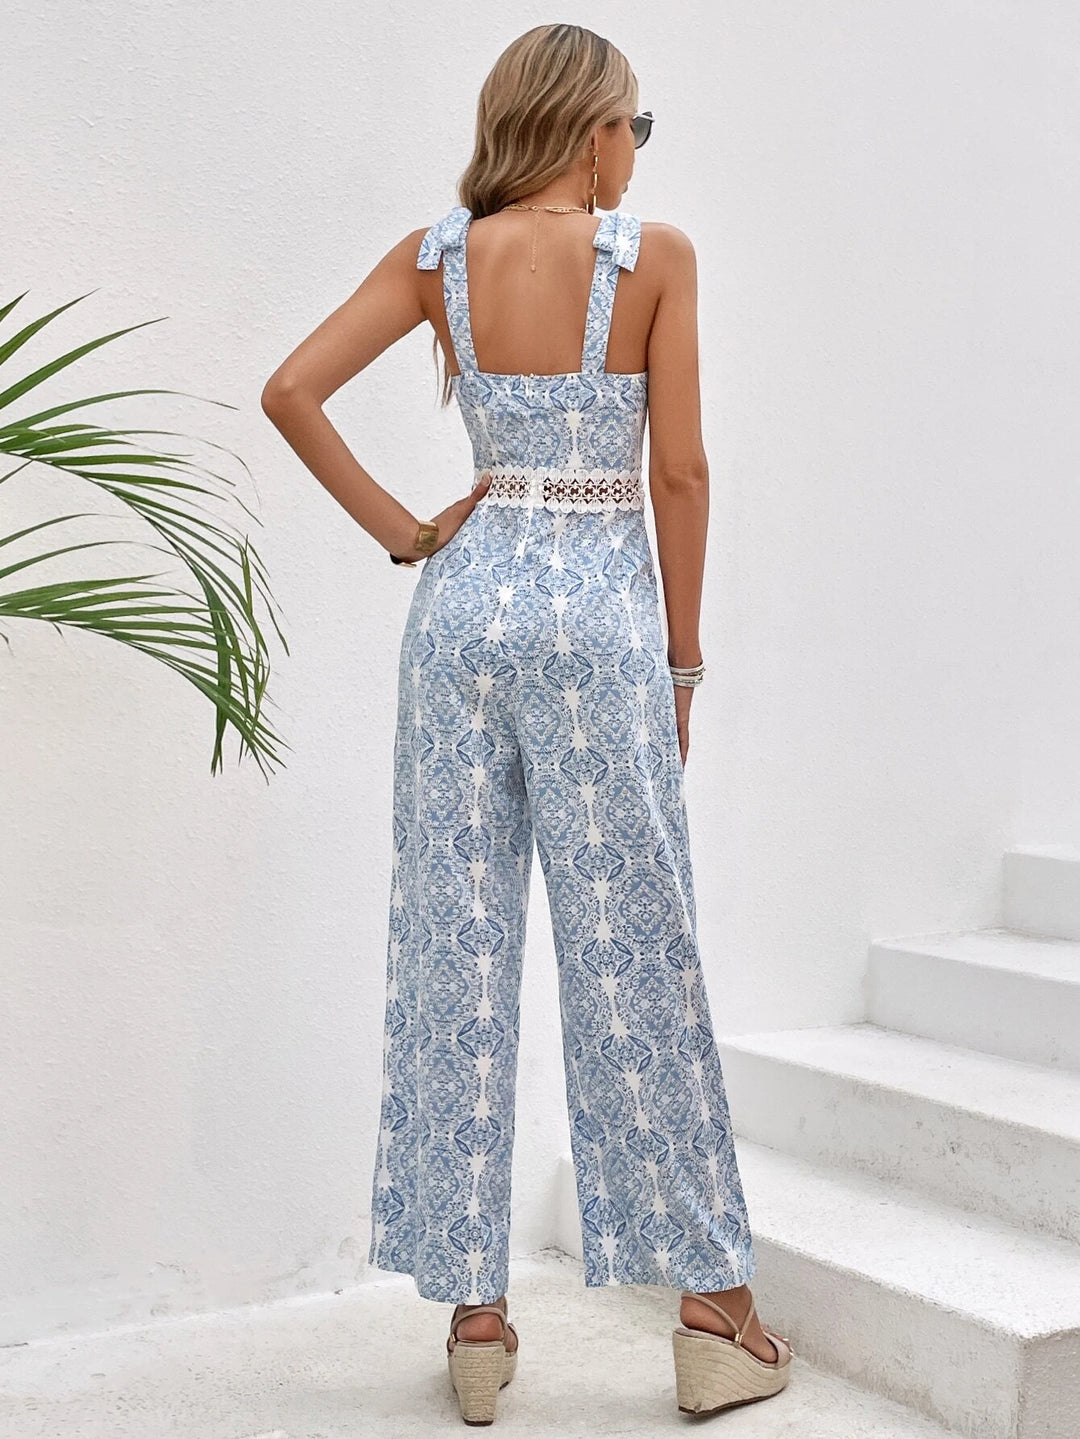 All Over Print Sleeveless Cami Jumpsuit